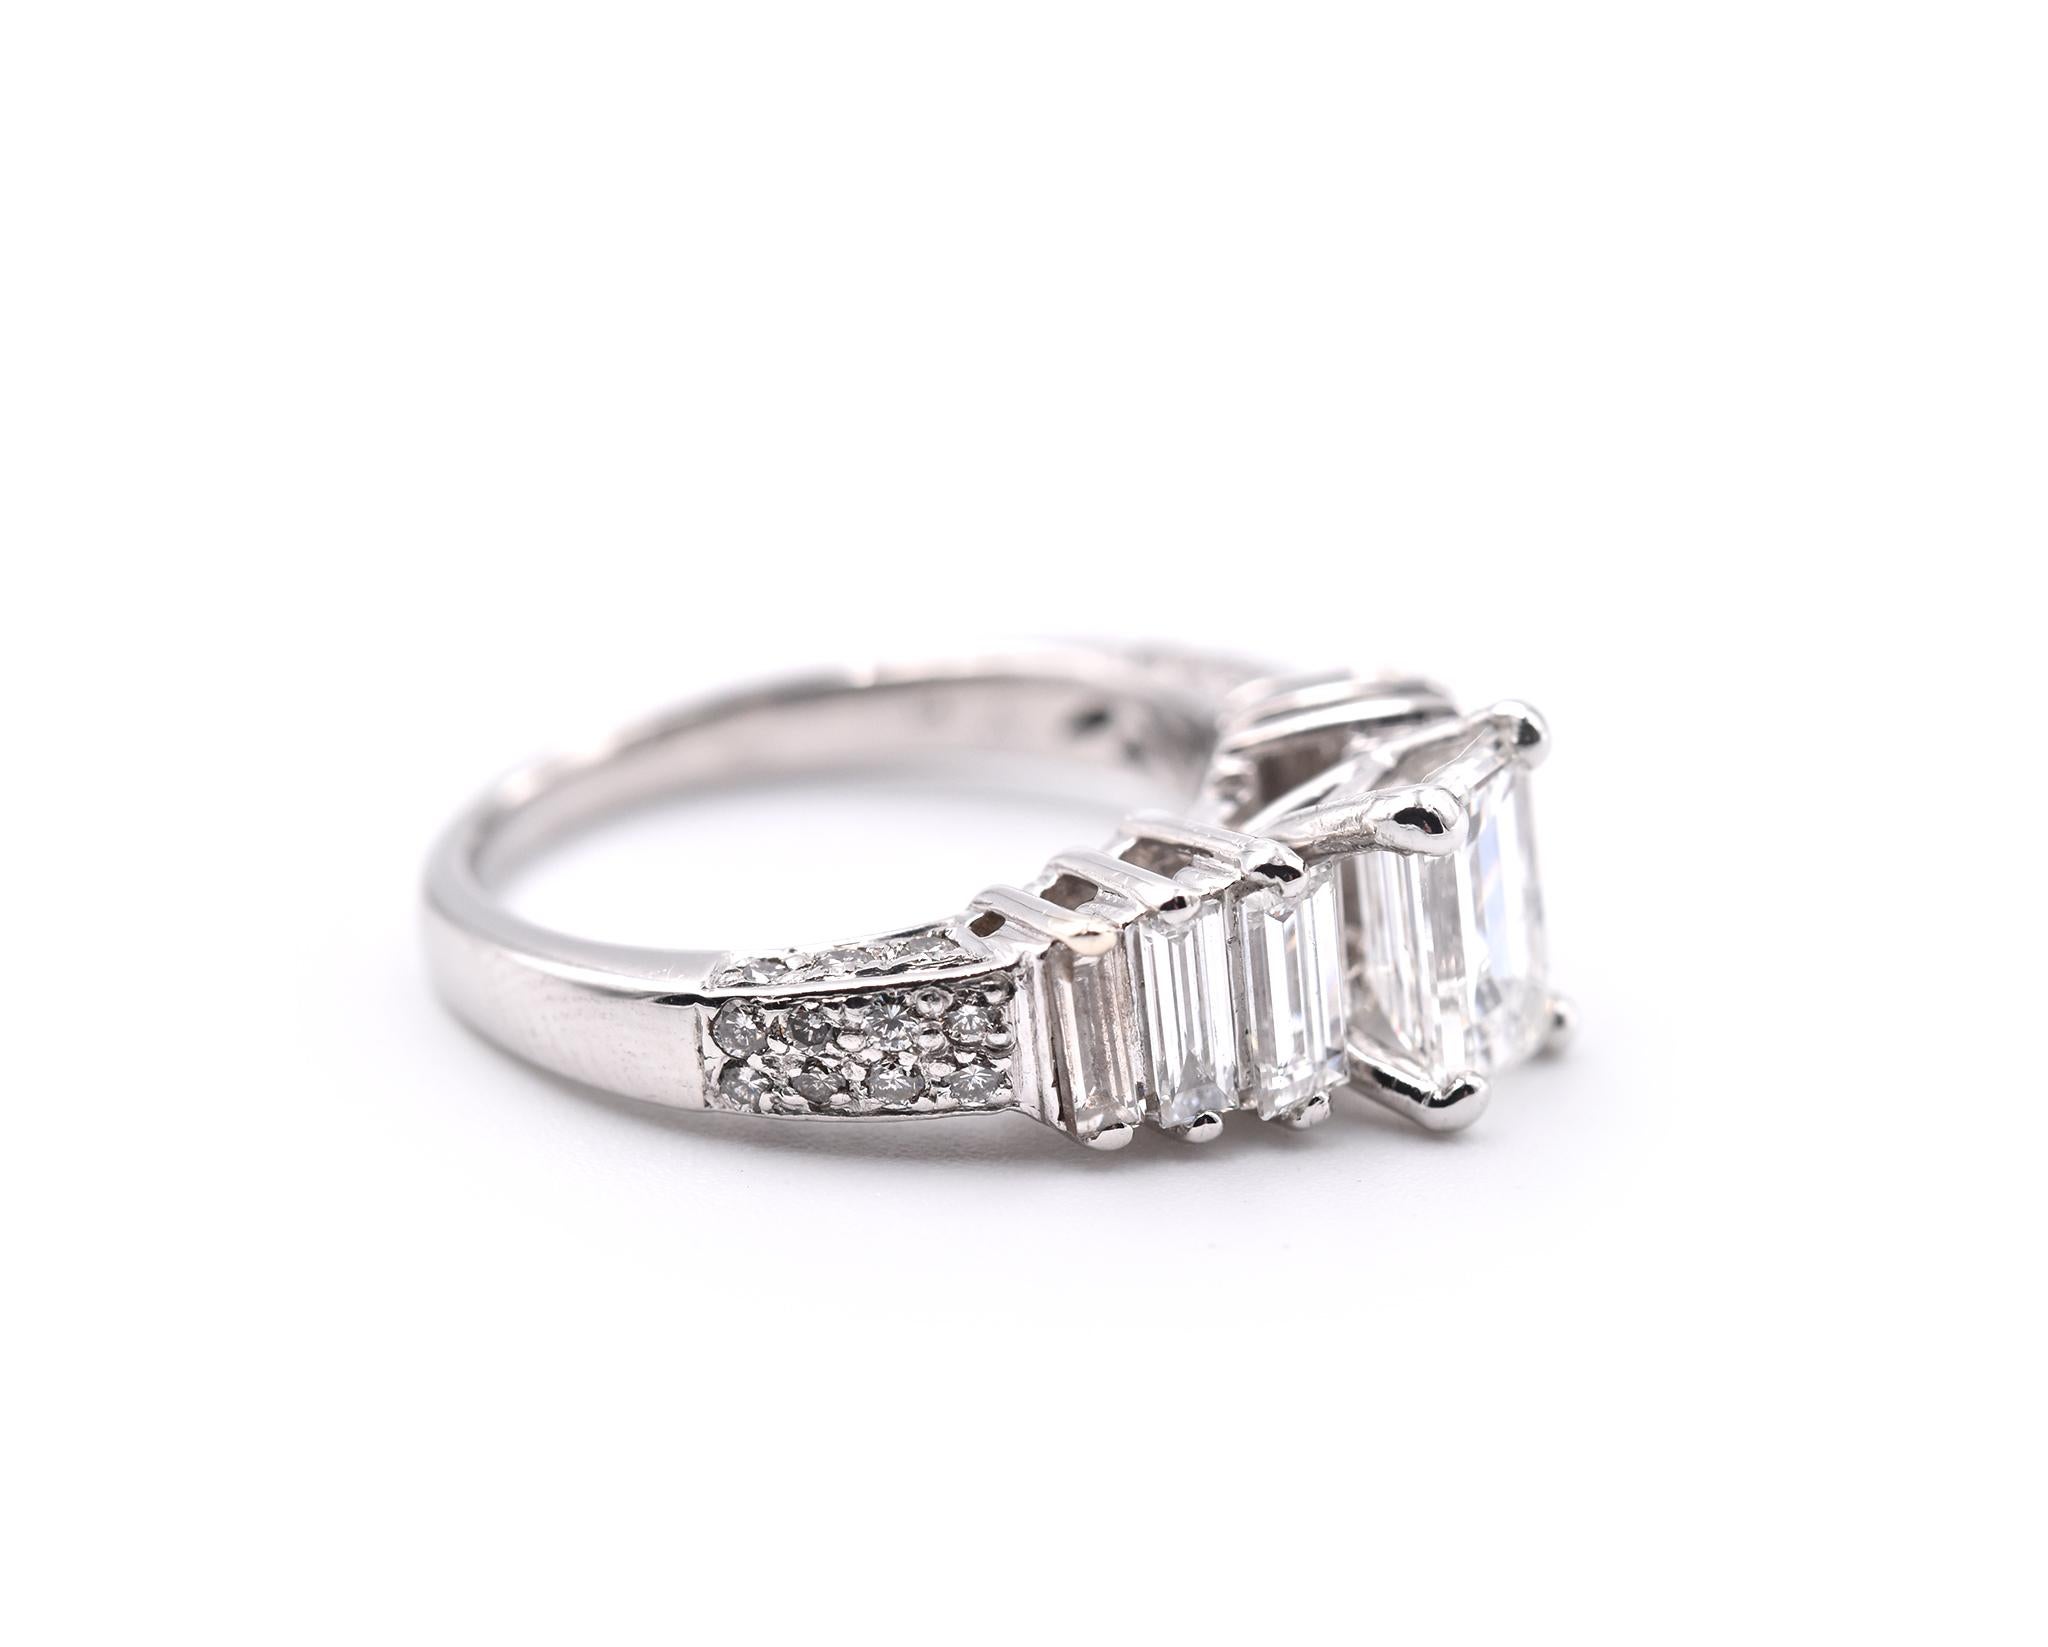 Designer: custom design
Material: platinum
Center Diamond: 1 emerald cut= 1.13ct   
Color: G
Clarity: SI2
Diamonds: 34 diamonds= 1.00cttw
Color: G
Clarity: SI2
Ring Size: 6 ¼ (please allow two additional shipping days for sizing